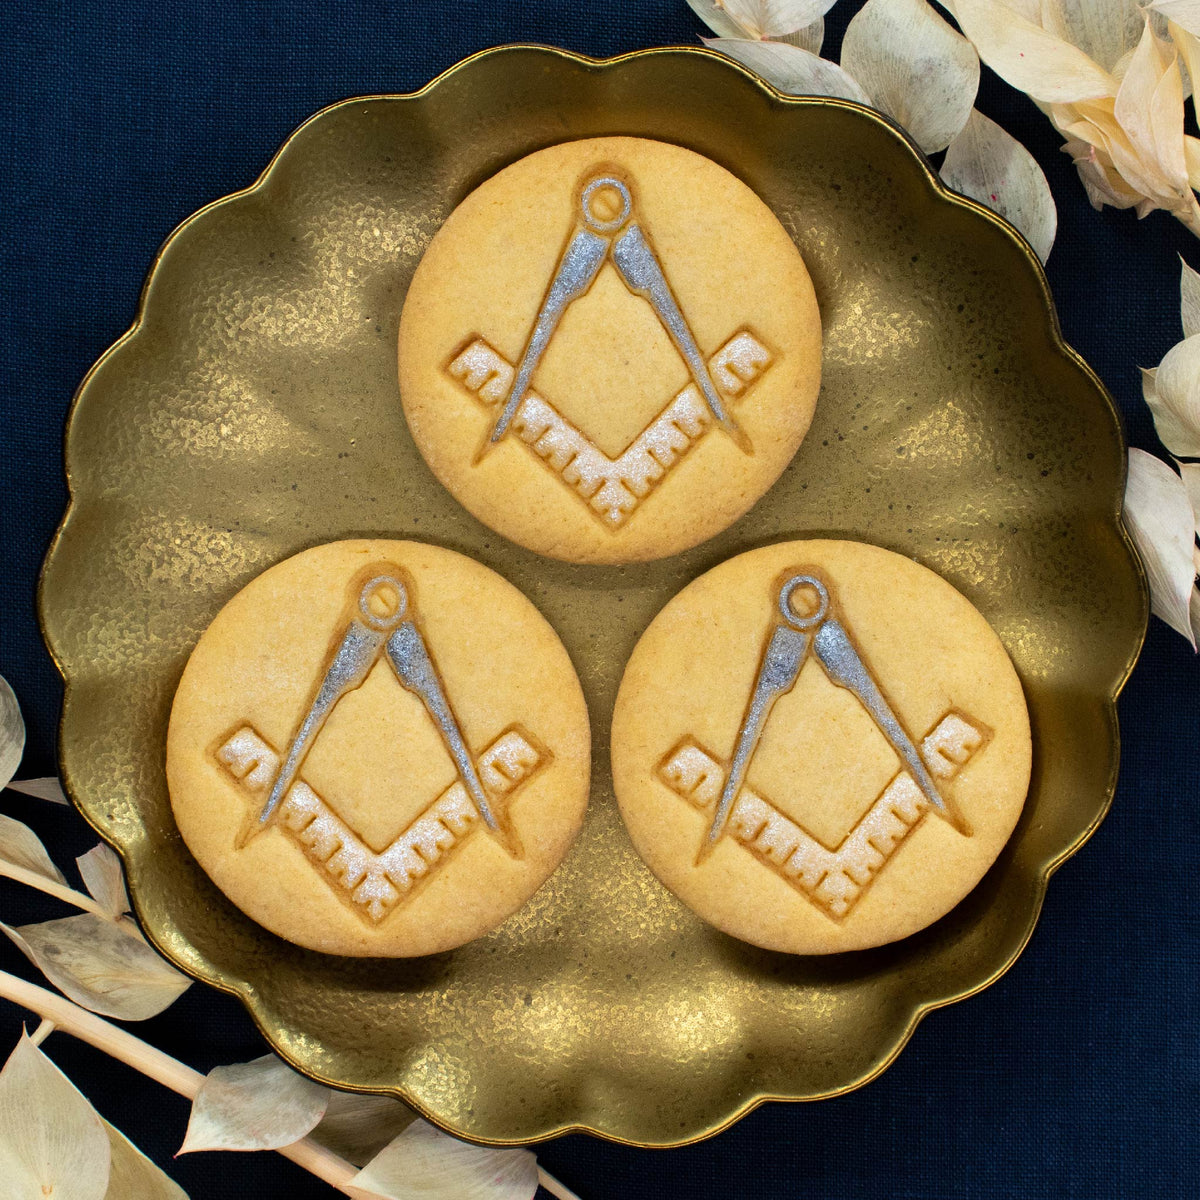 masonic cookies with hand painted edible food coloring on the compasses and ruler